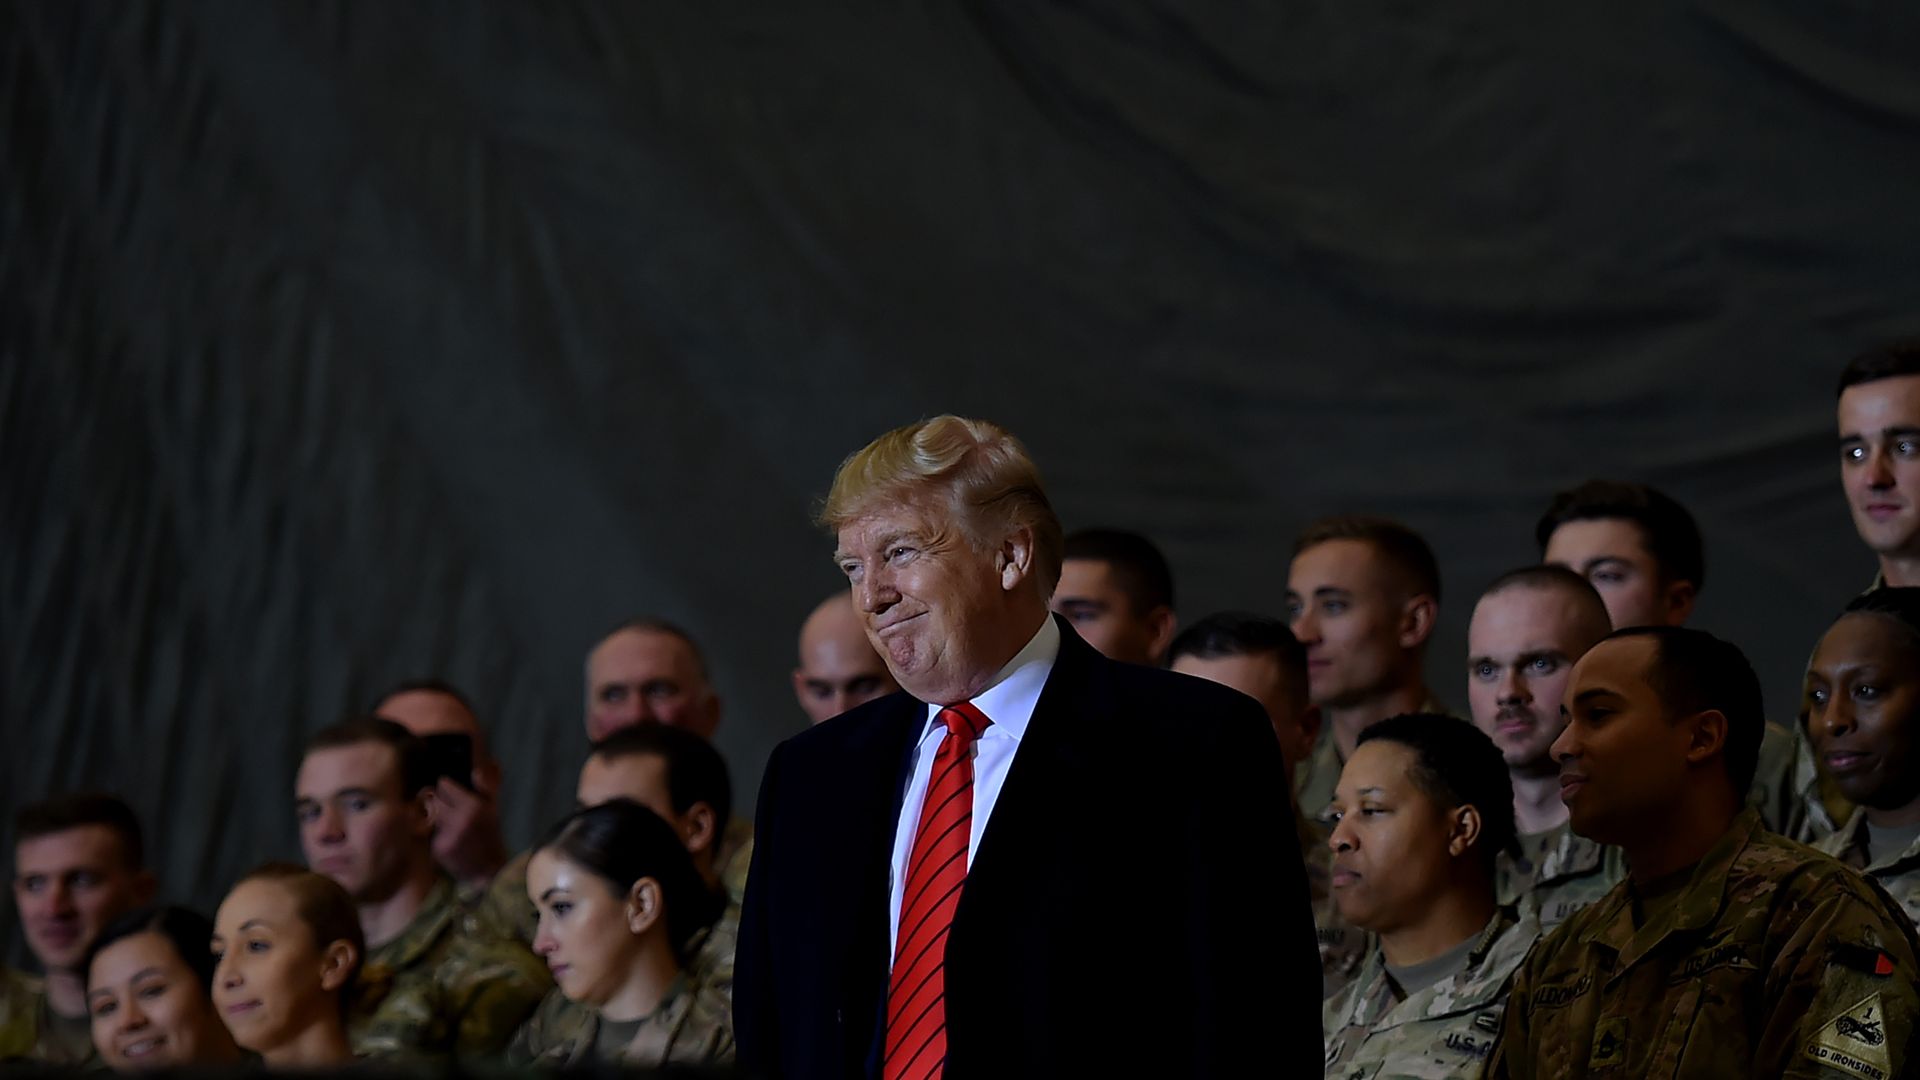 In this image, Trump stands in front of a few rows of soldiers.